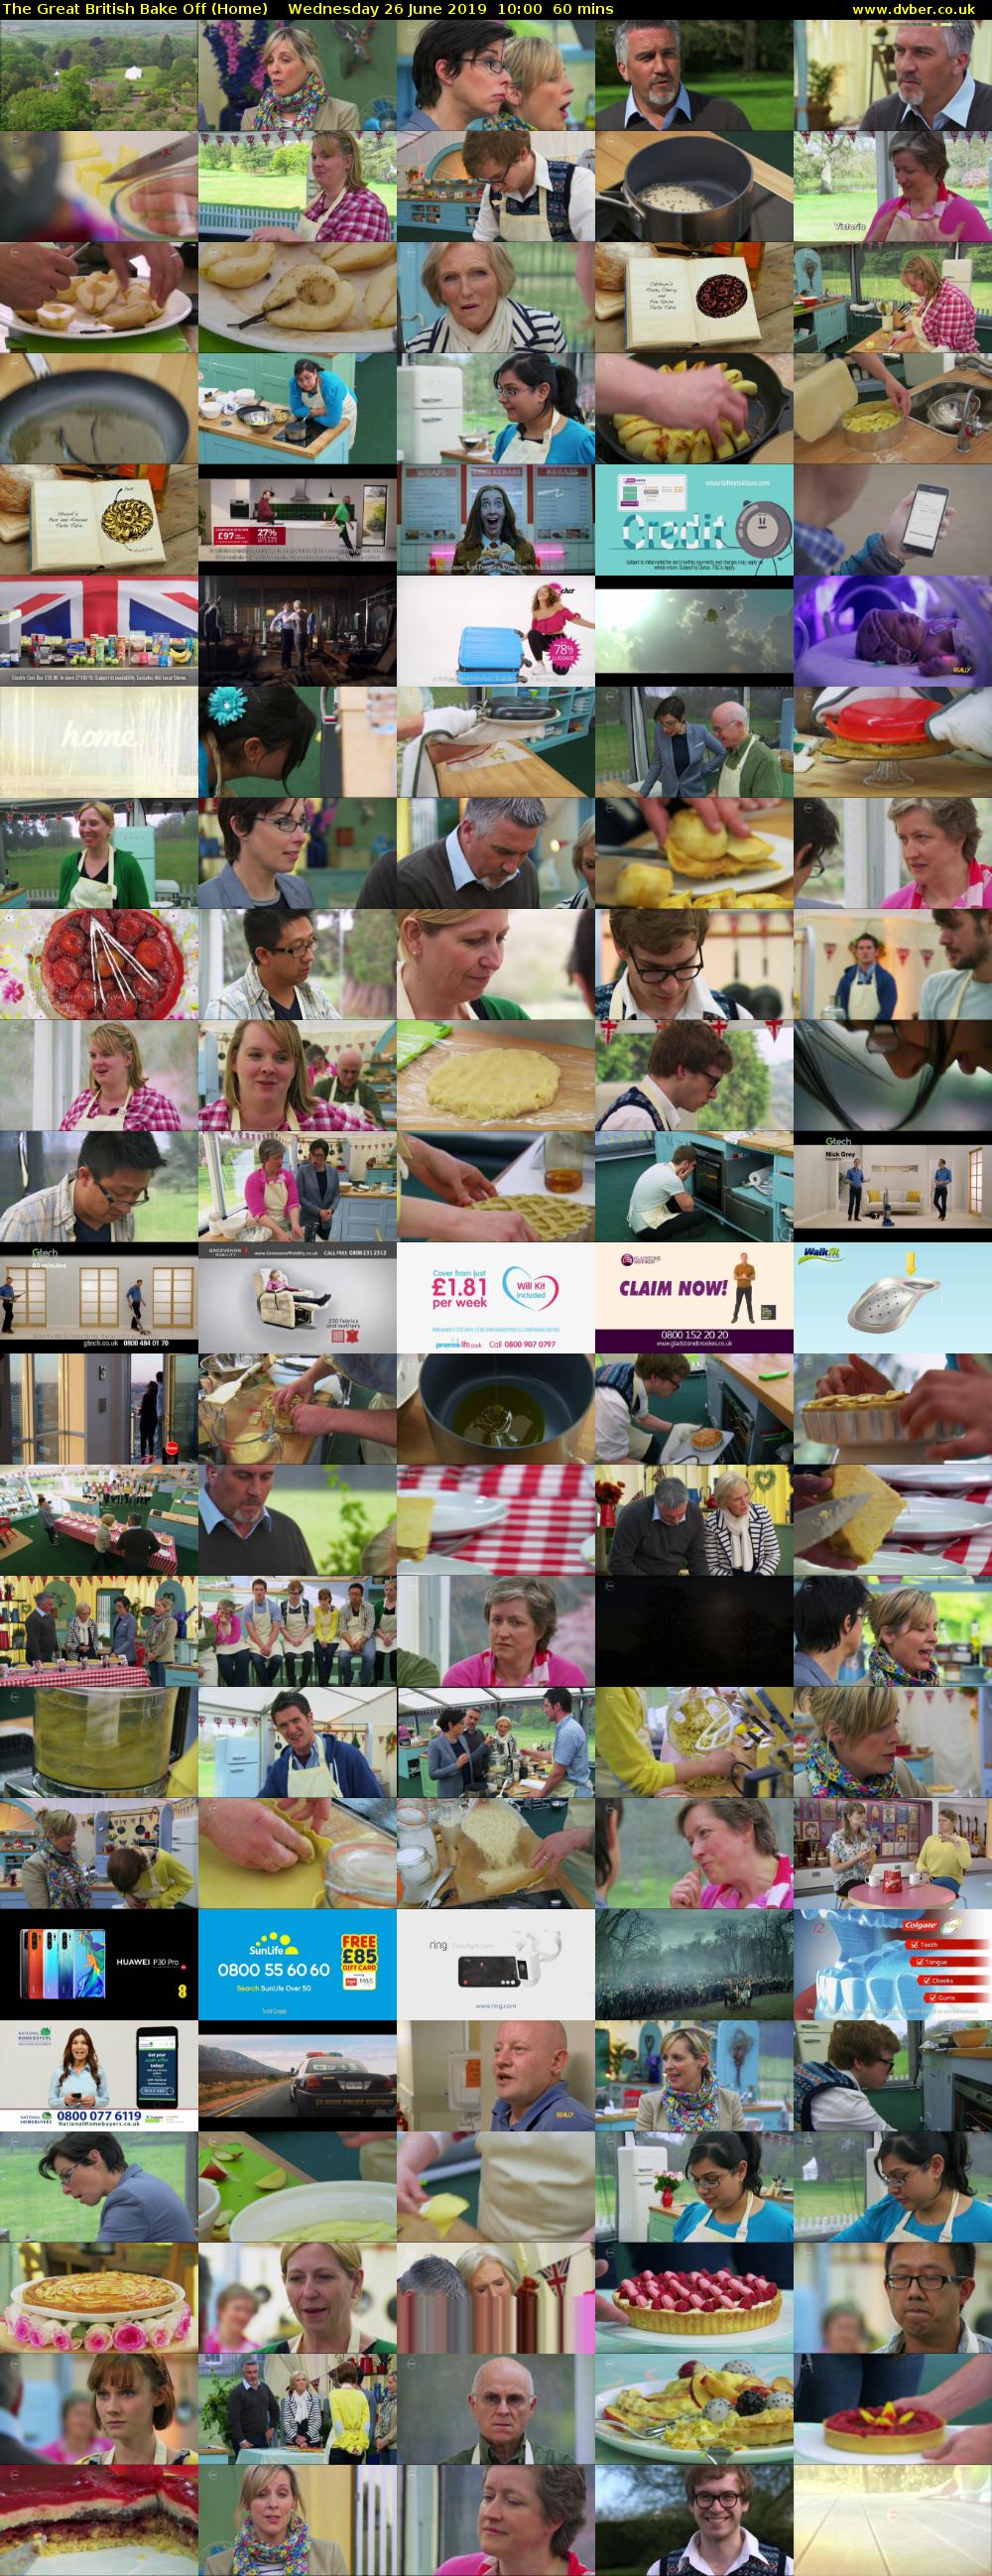 The Great British Bake Off (Home) Wednesday 26 June 2019 10:00 - 11:00